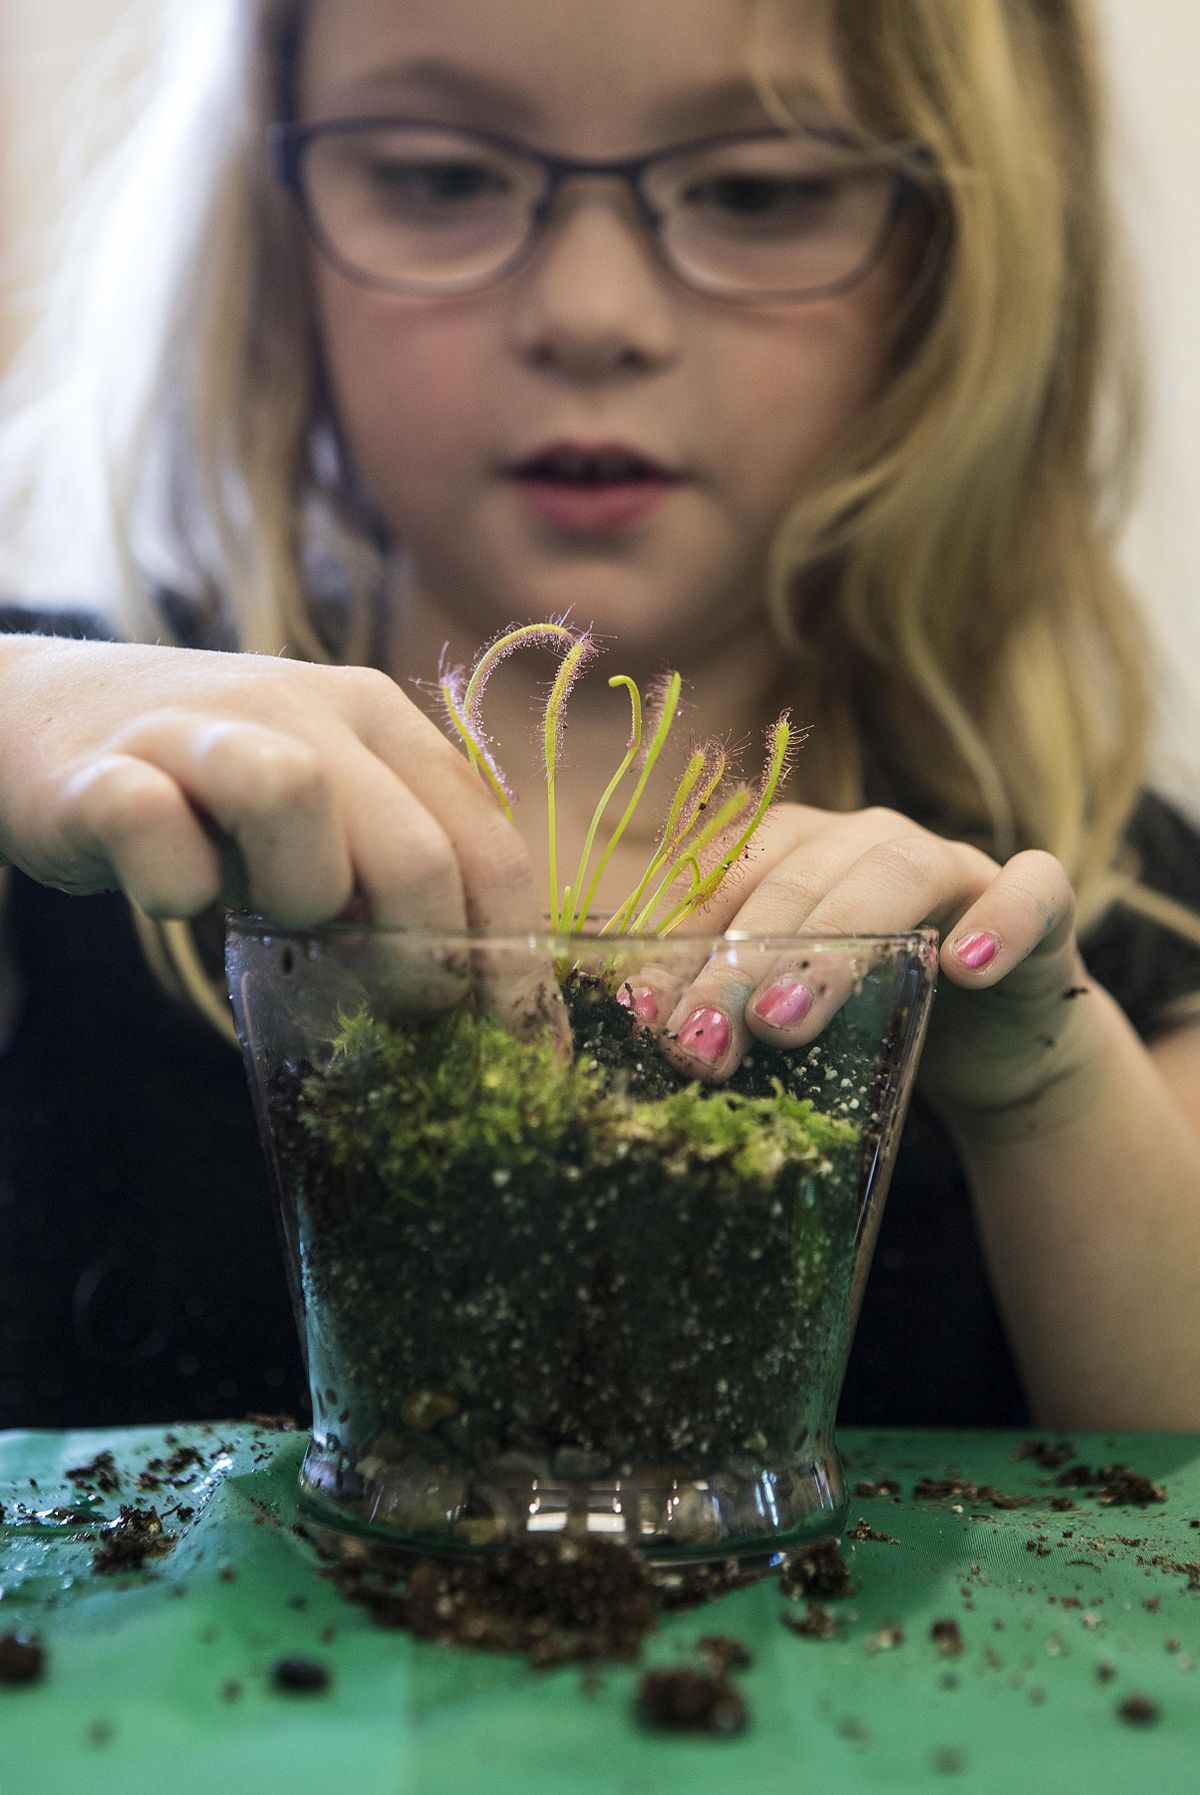 This photo taken March 27, 2018, shows Anna Curry, 7, pushing a Sundew plant into the soil as she makes a terrarium for the carnivorous plant while at the Darrington Library in Darrington, Wash. (Andy Bronson / Associated Press)